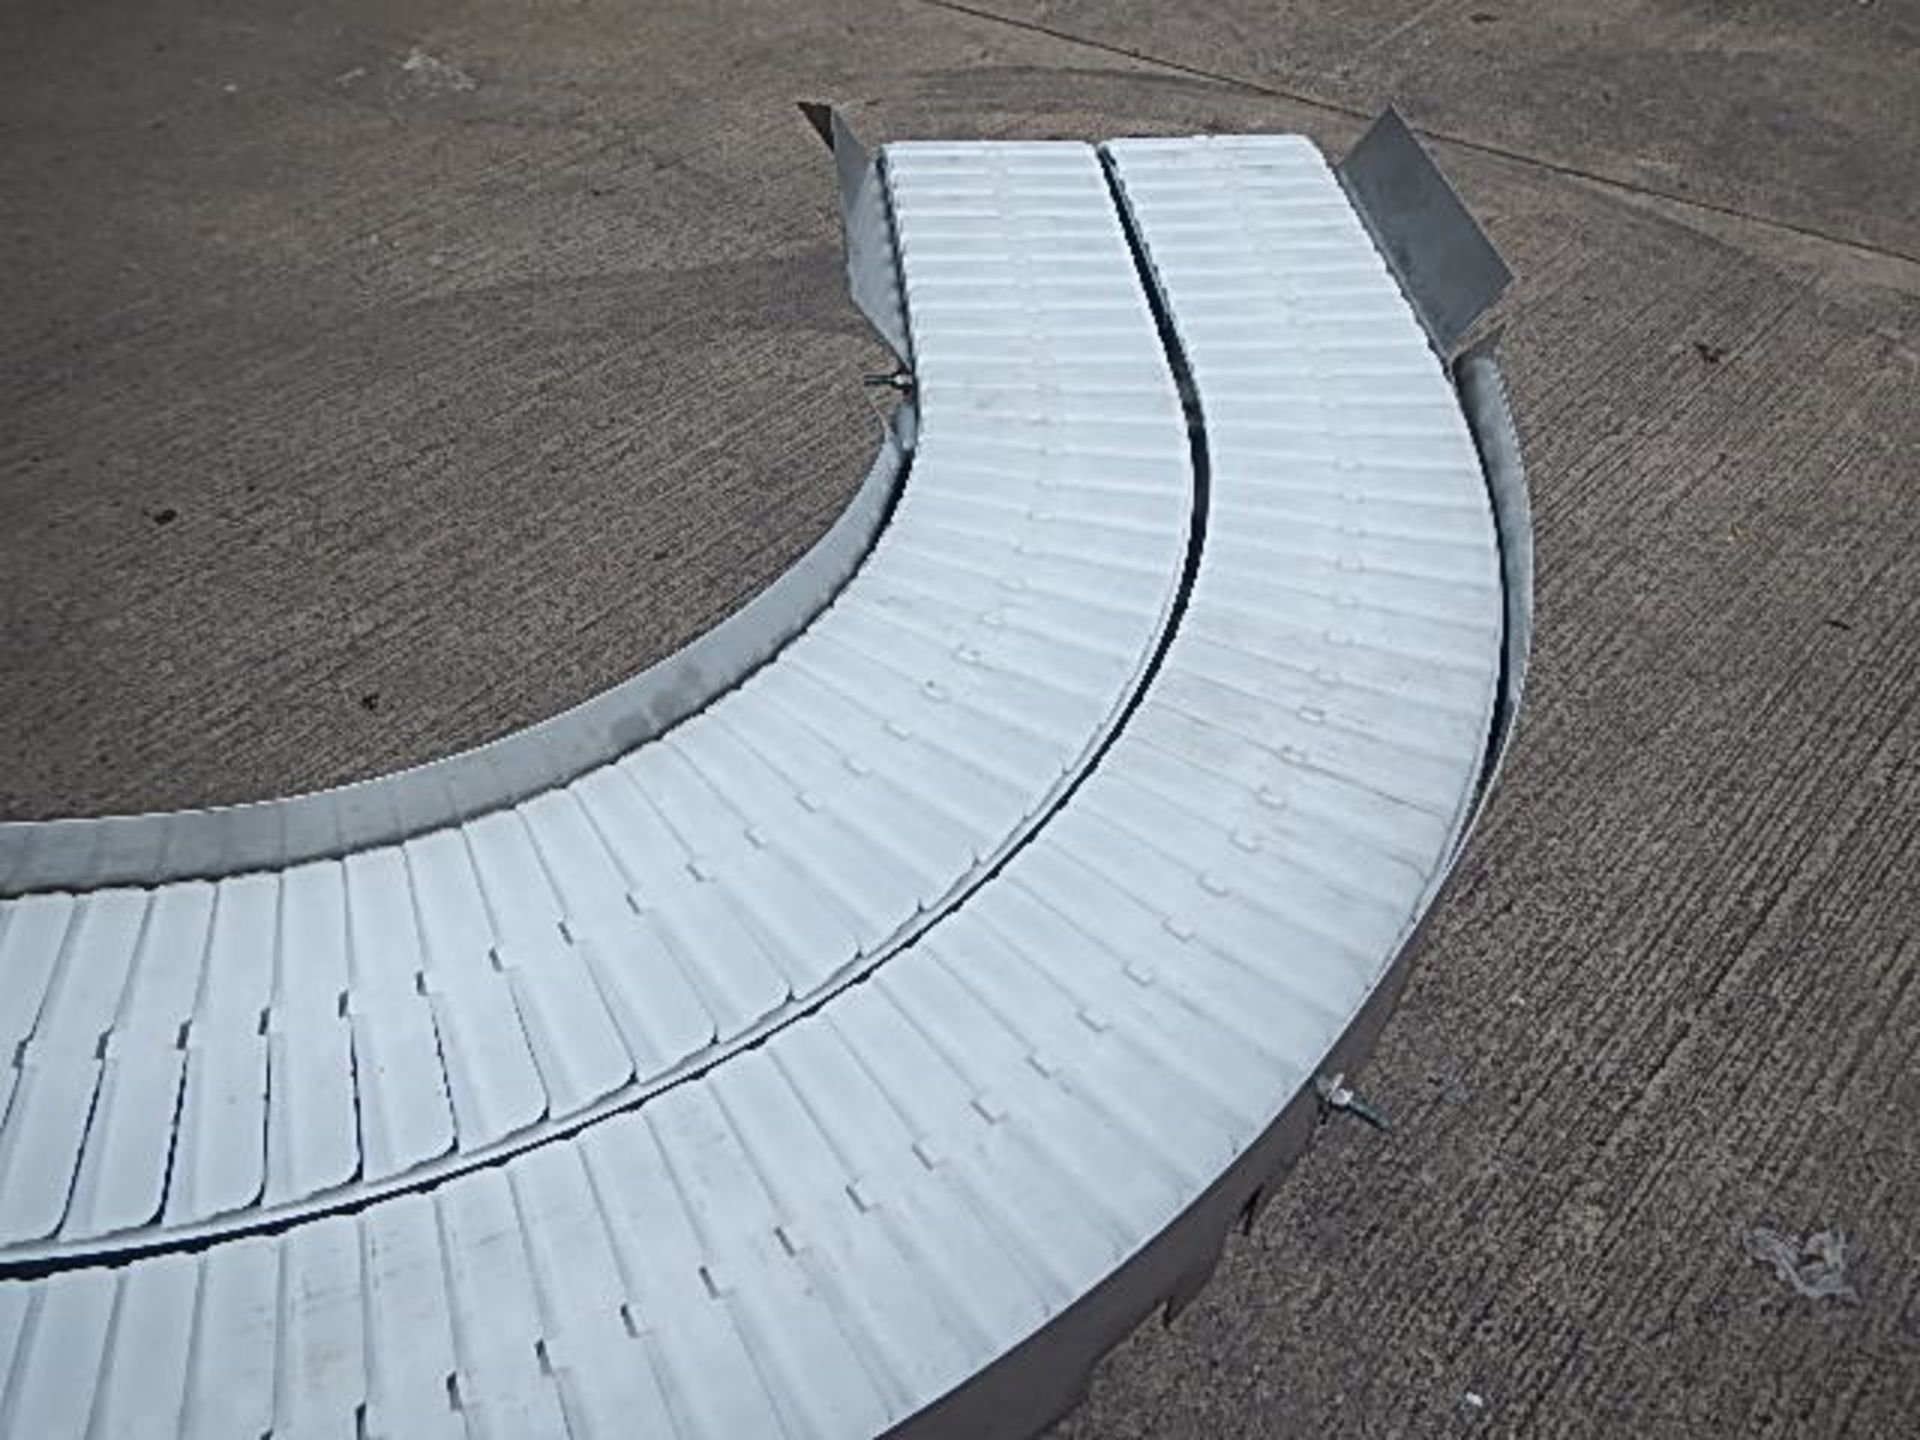 FlexLink white plastic slat sanitary belt conveyor with a 90 degree bend at the end - Image 5 of 7